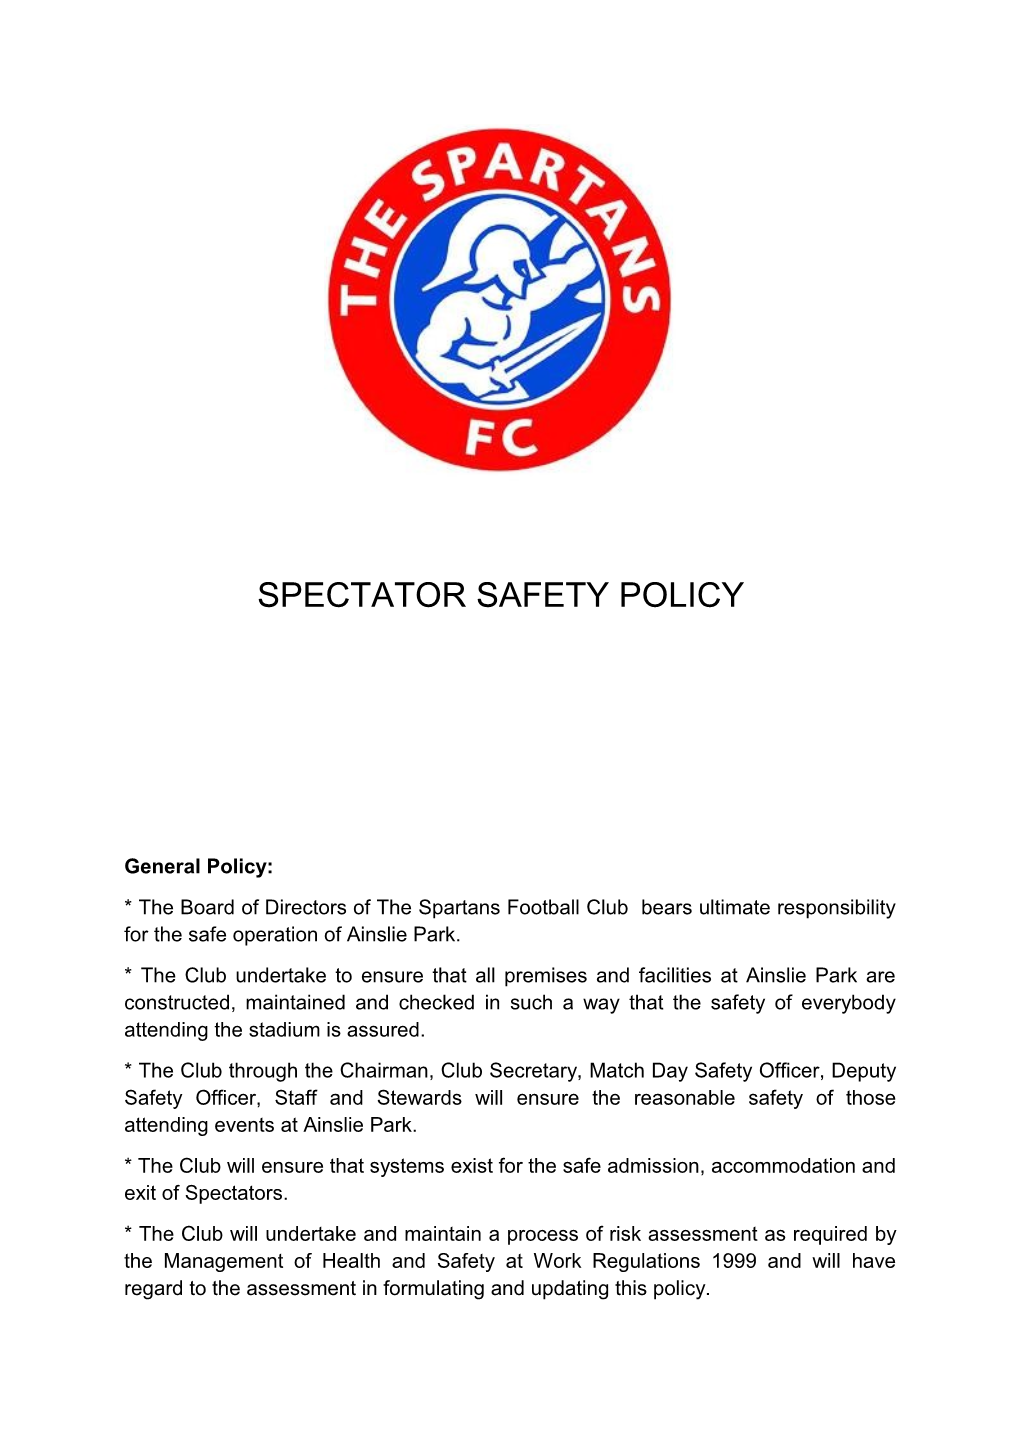 Spectator Safety Policy